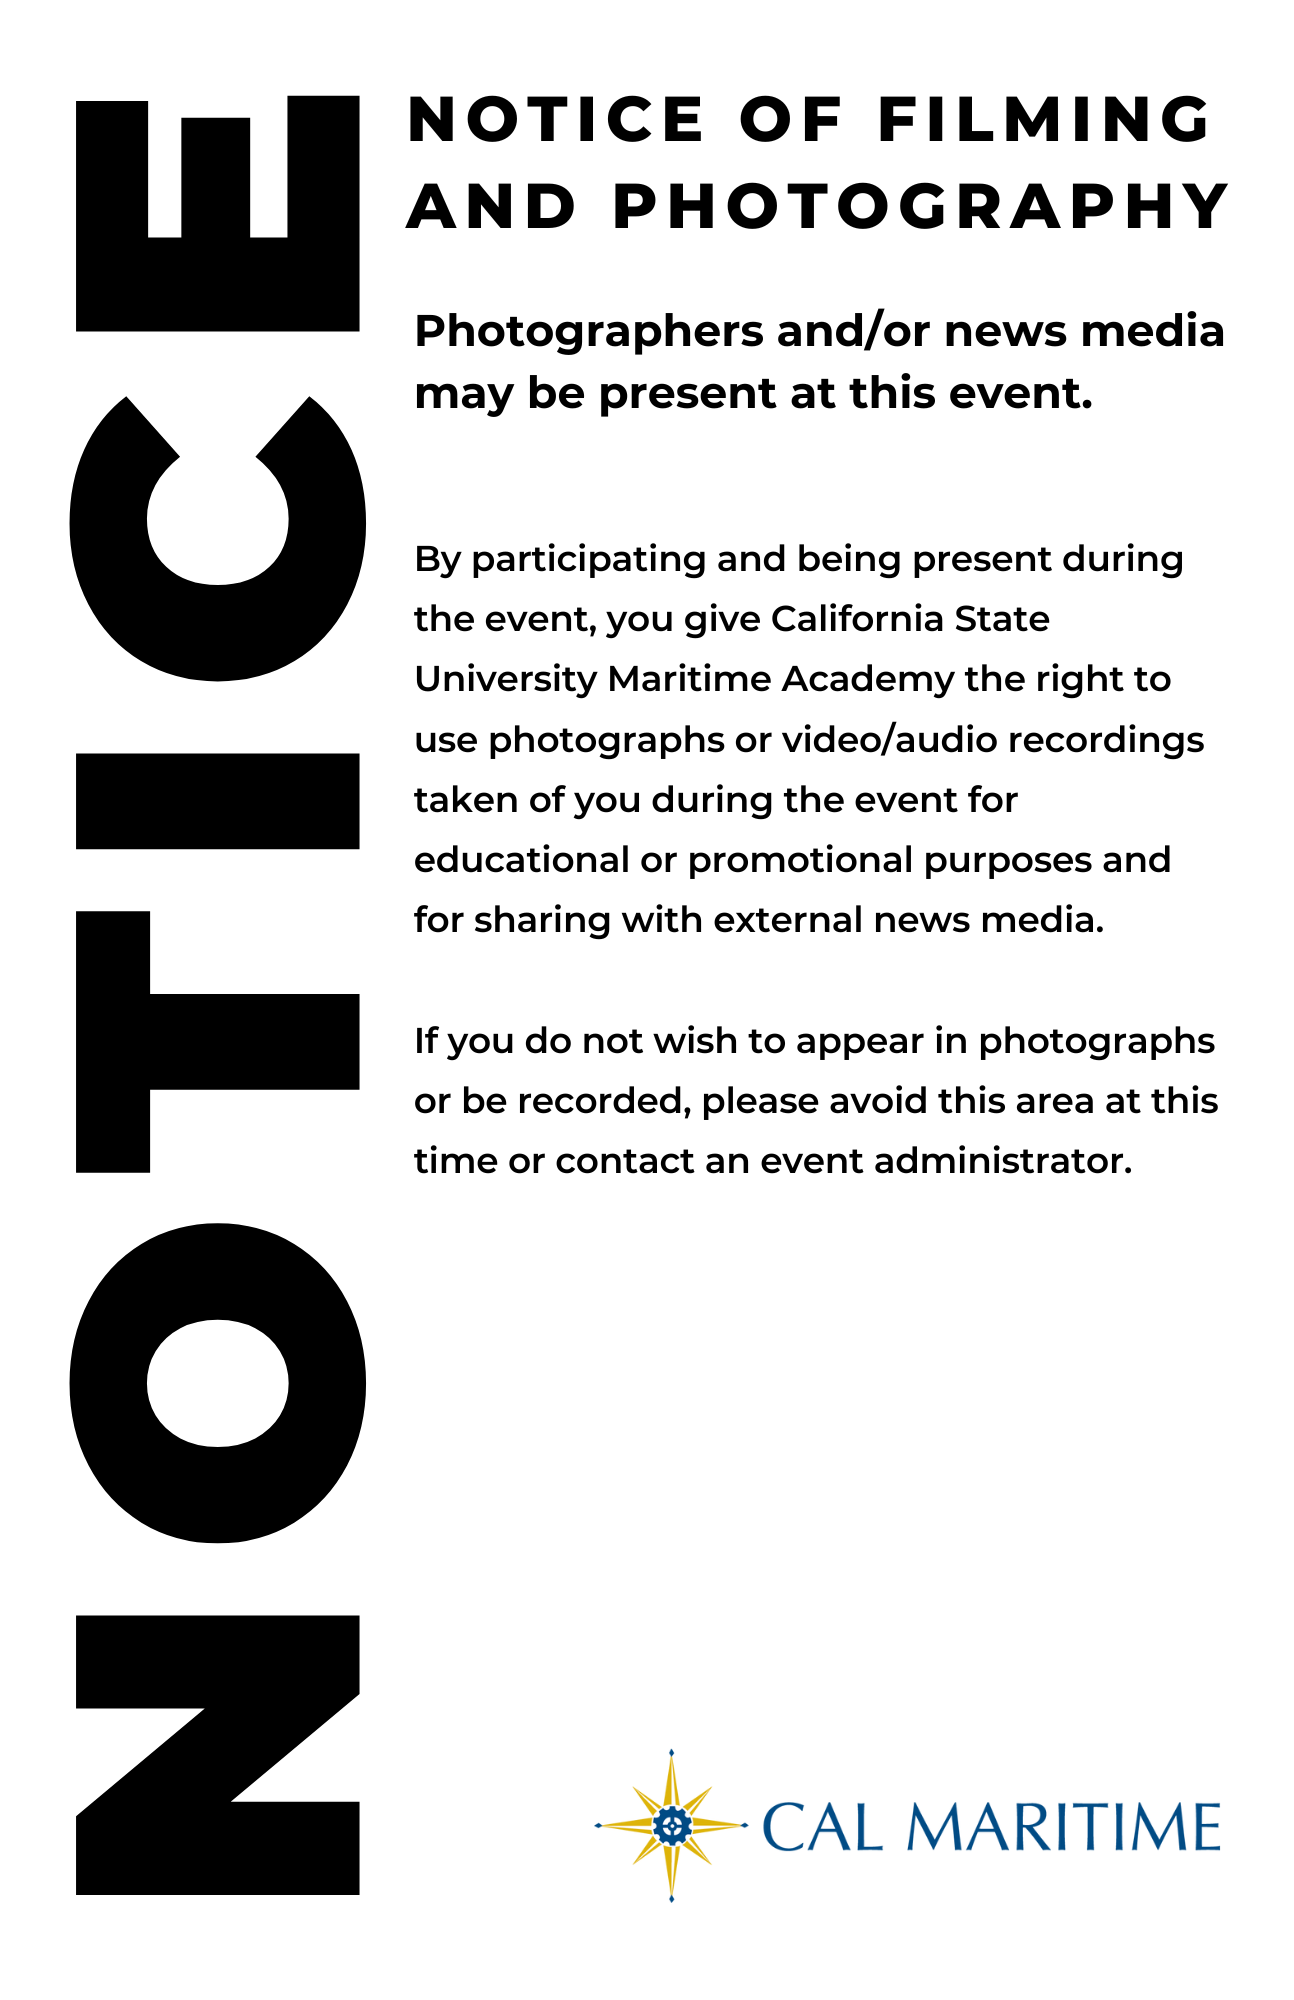 NOTICE OF FILMING AND PHOTOGRAPHY - POSTER BLACK